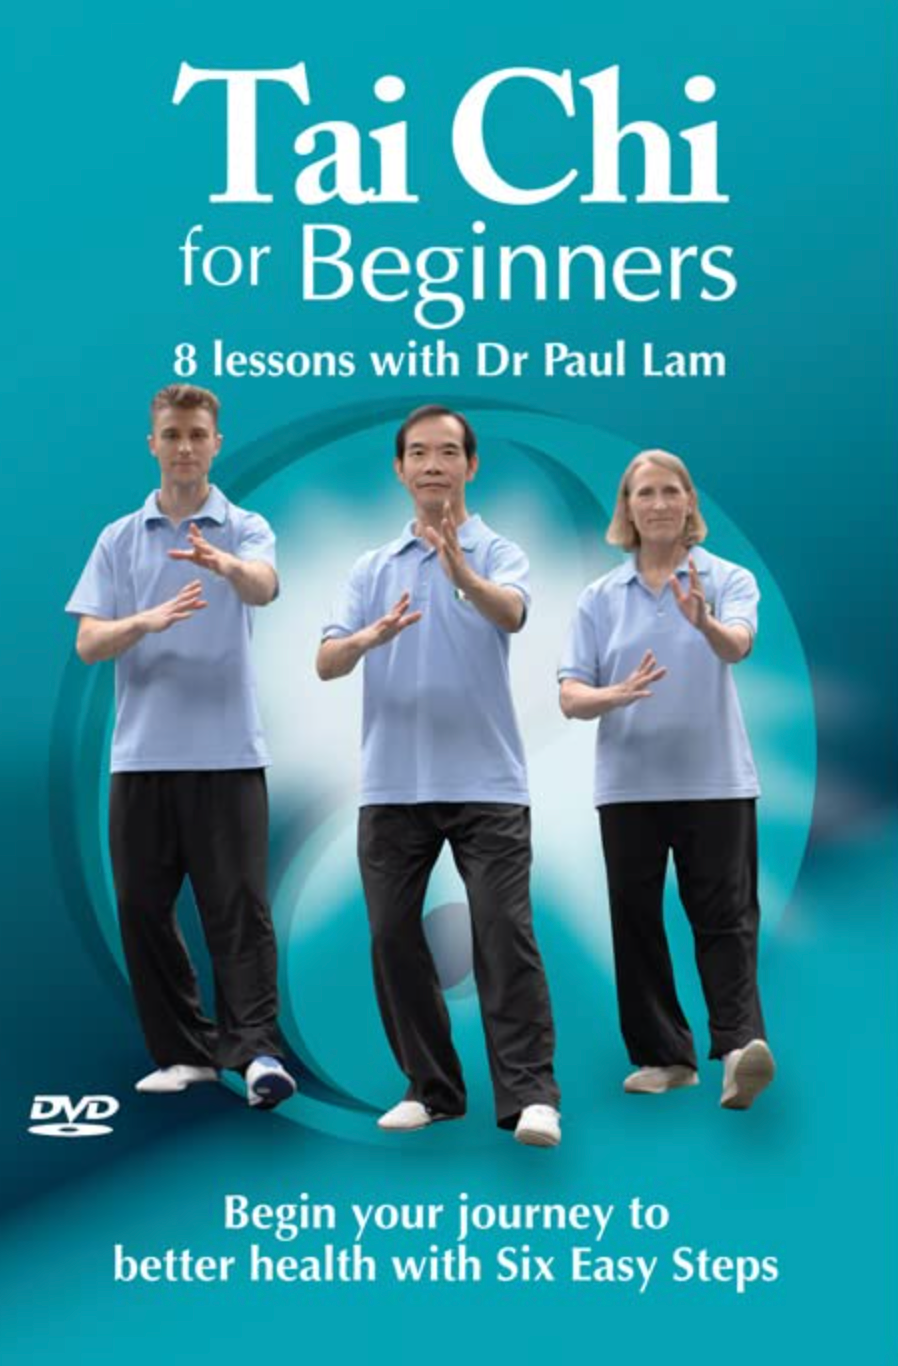 Tai Chi for Beginners 8 Lessons DVD by Paul Lam (Preowned)